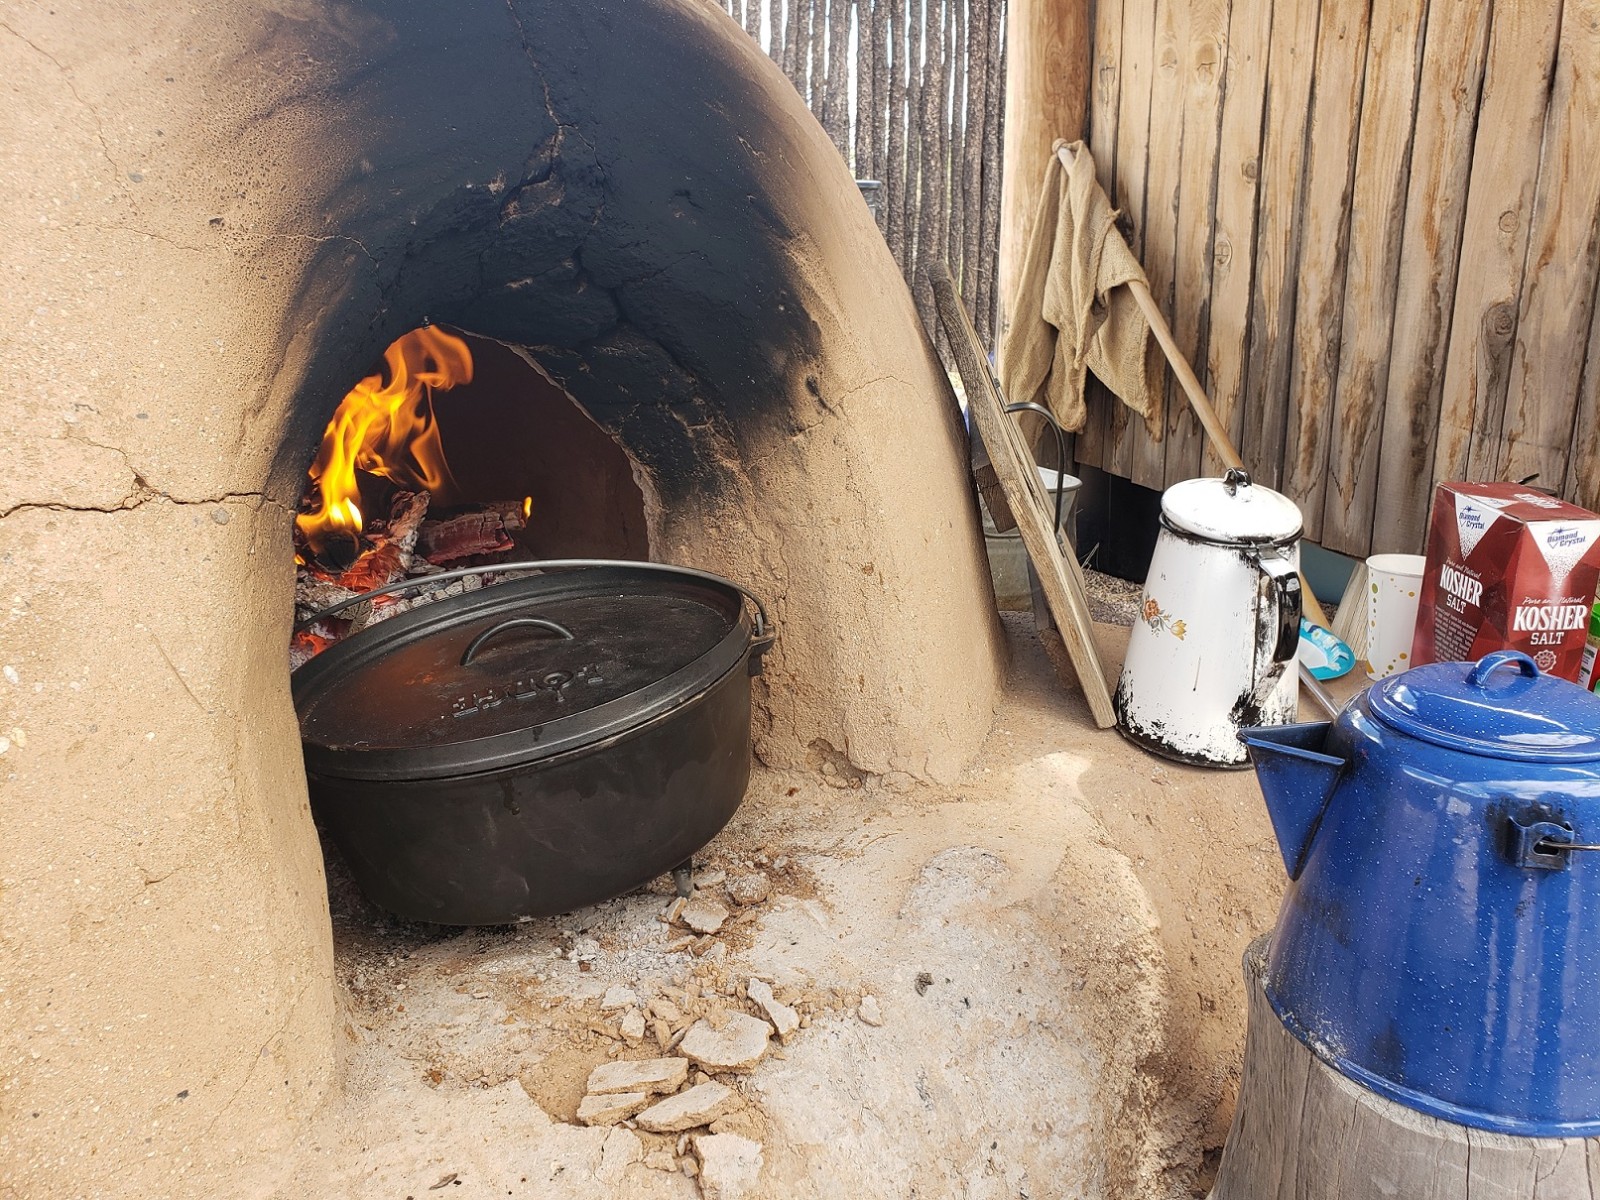 Stew and coffee are prepared in Fort Selden's horno during 2019's Spring Fling.